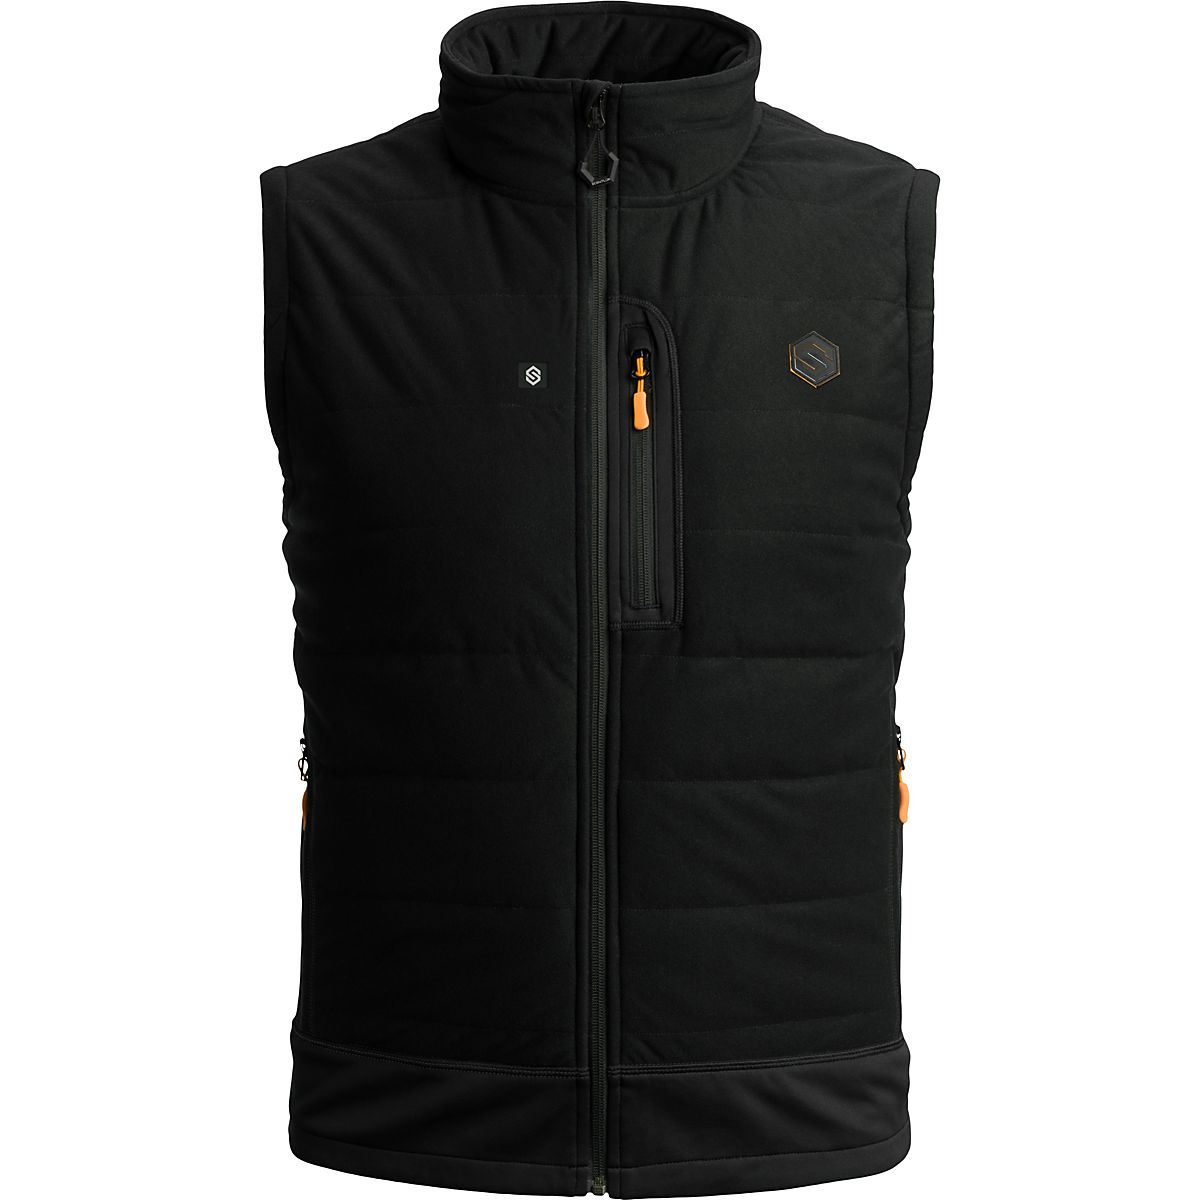 ScentLok Men's BE:1 Reactor Vest Plus | Free Shipping at Academy